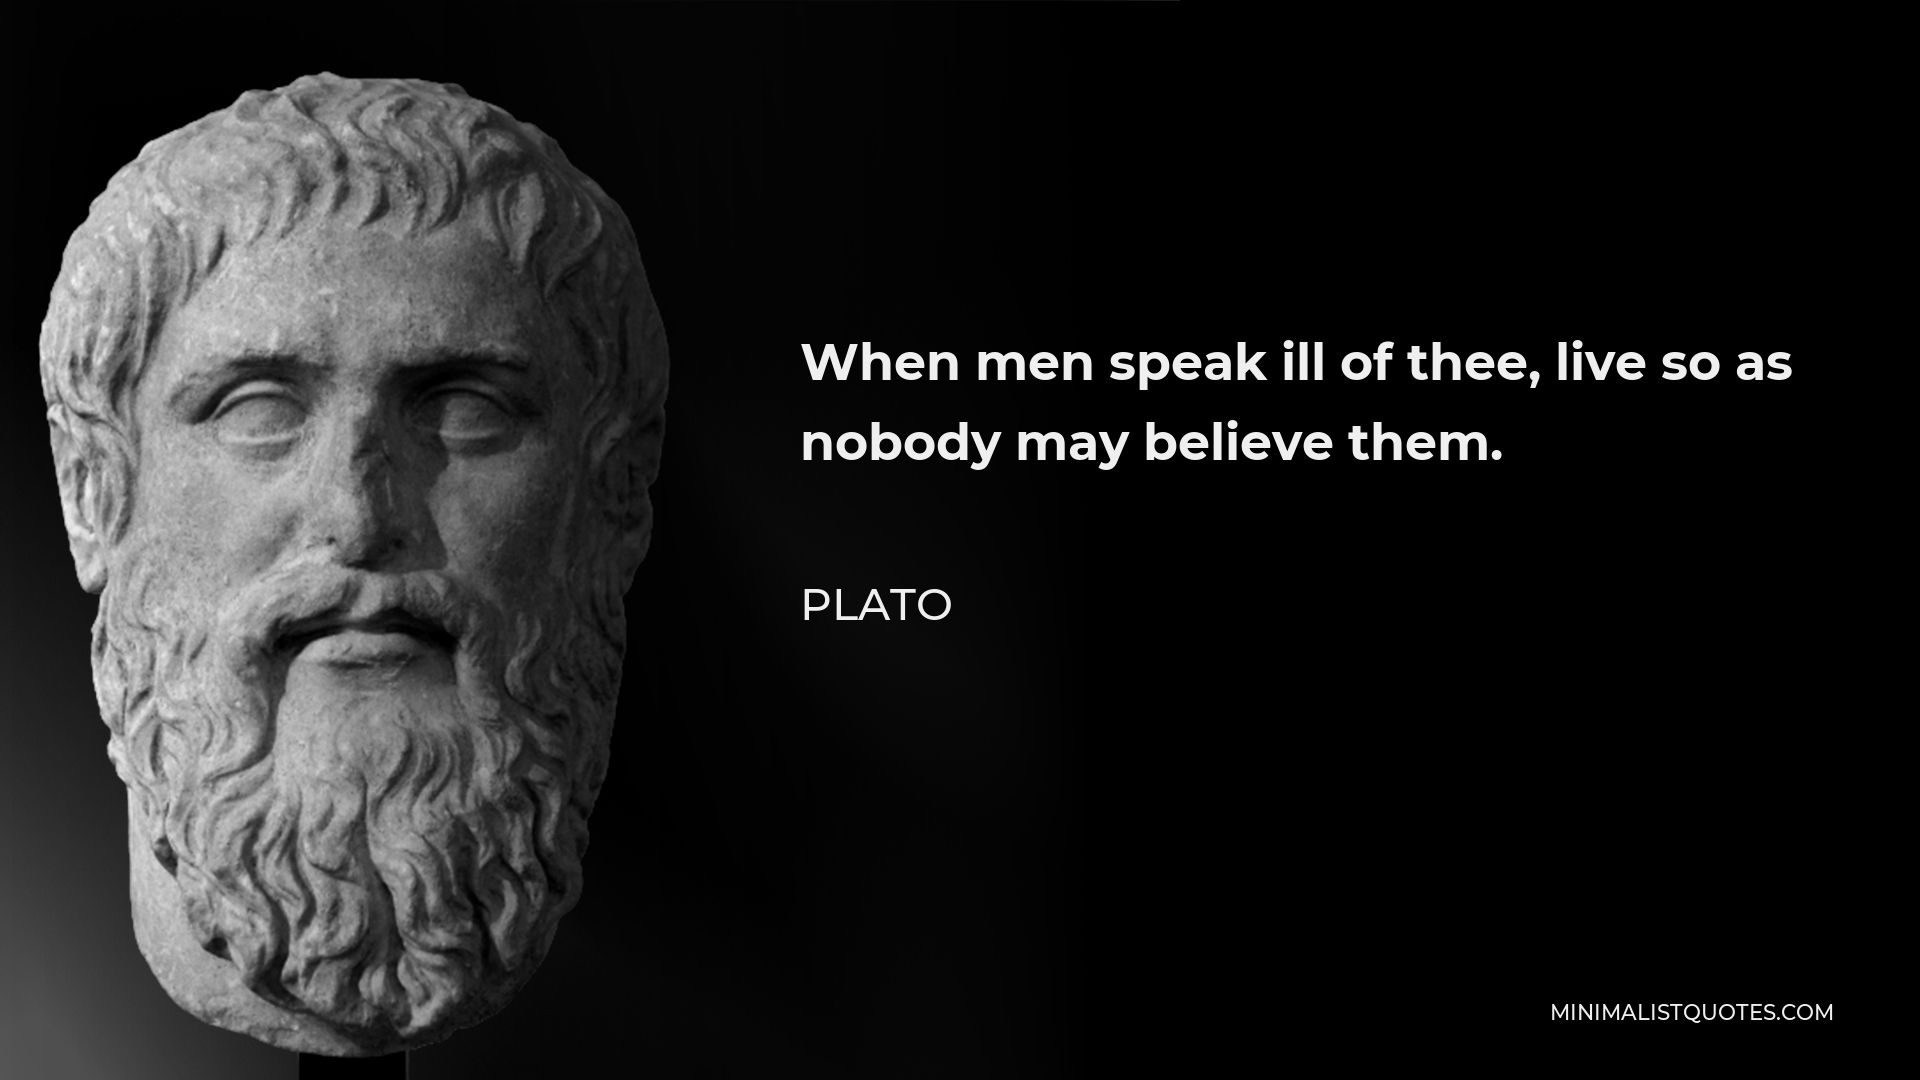 Plato Quote - When men speak ill of thee, live so as nobody may believe them.